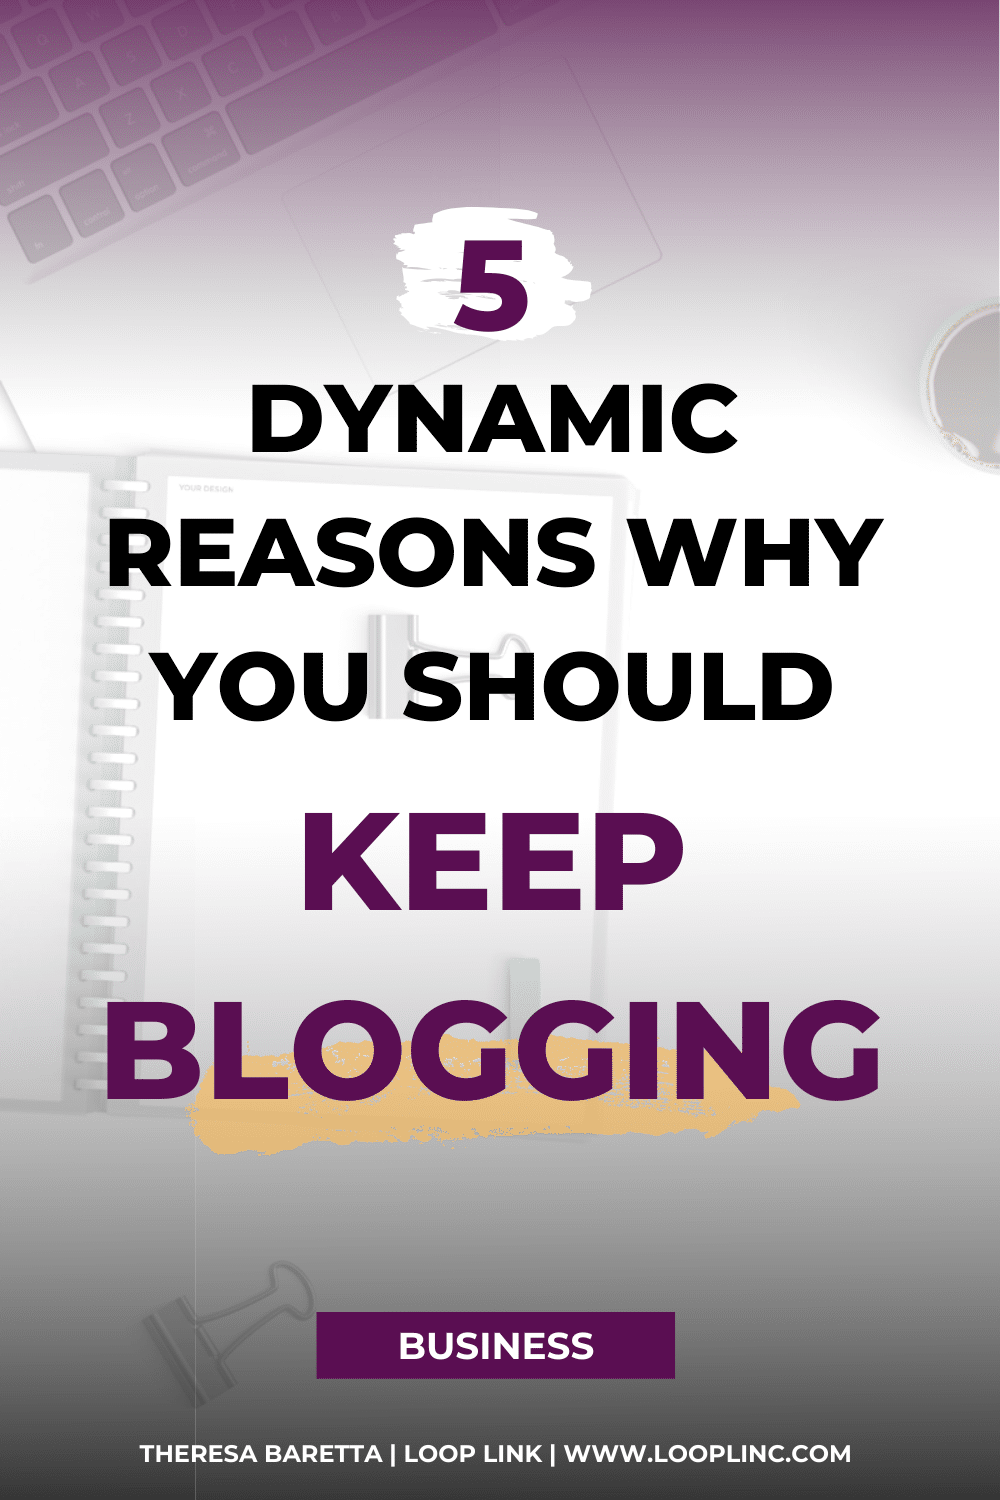 5 Dynamic Reasons Why You Should Keep Blogging